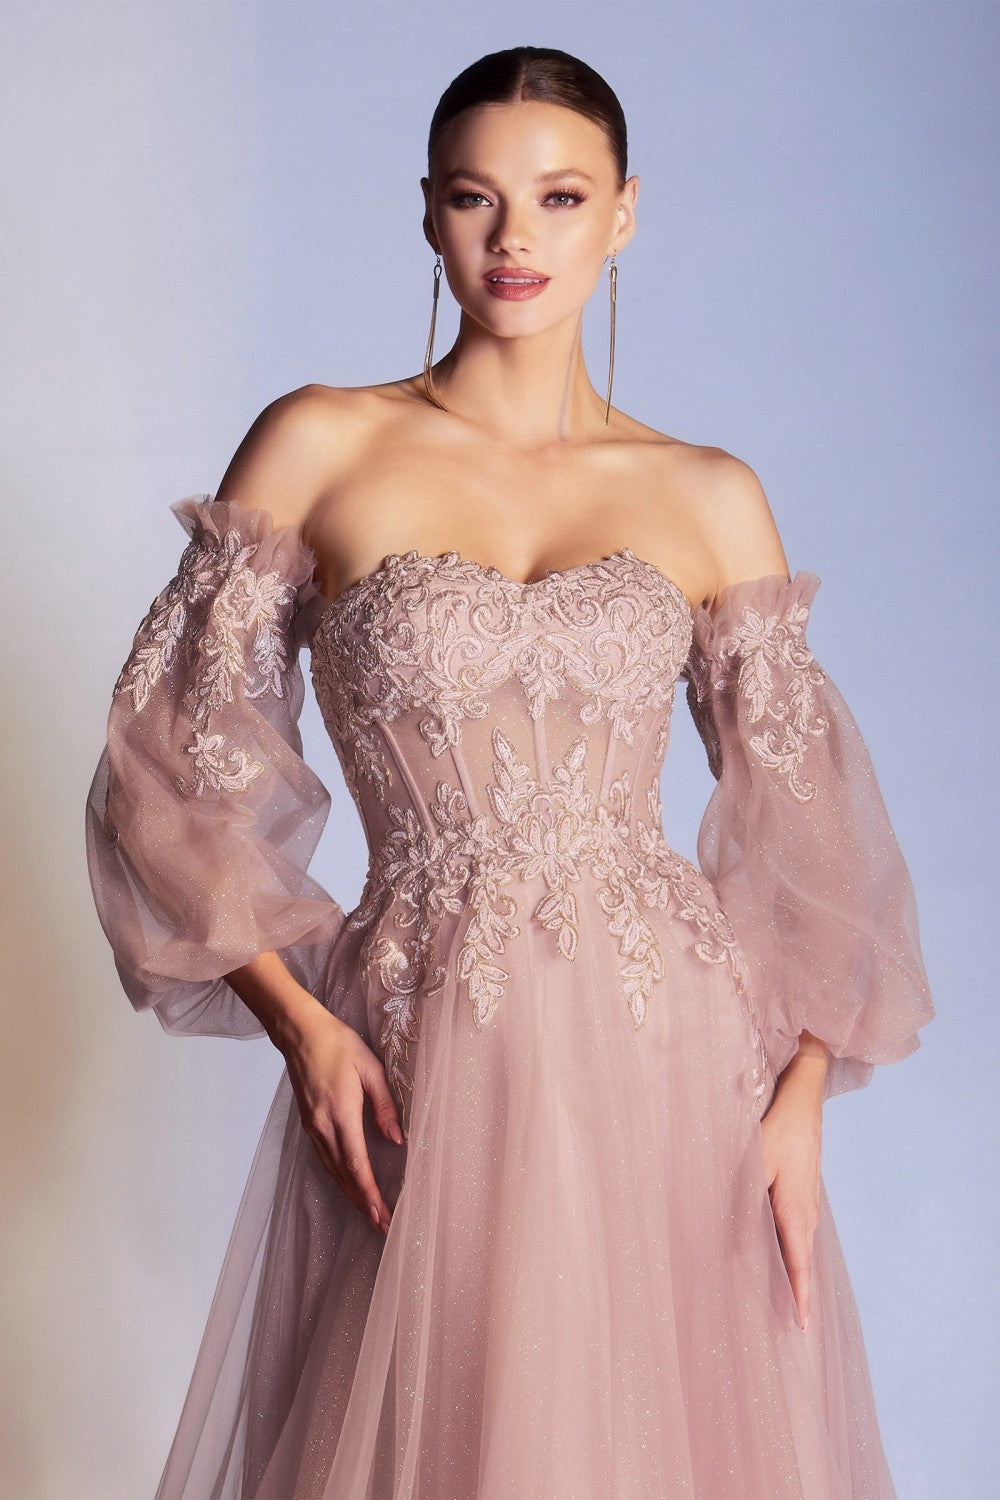 Exclusive Dusty Rose Ball Gown Quinceanera Dress With Lace Appliques  $289.00 | Ball gowns, Gowns, Dusty rose dress